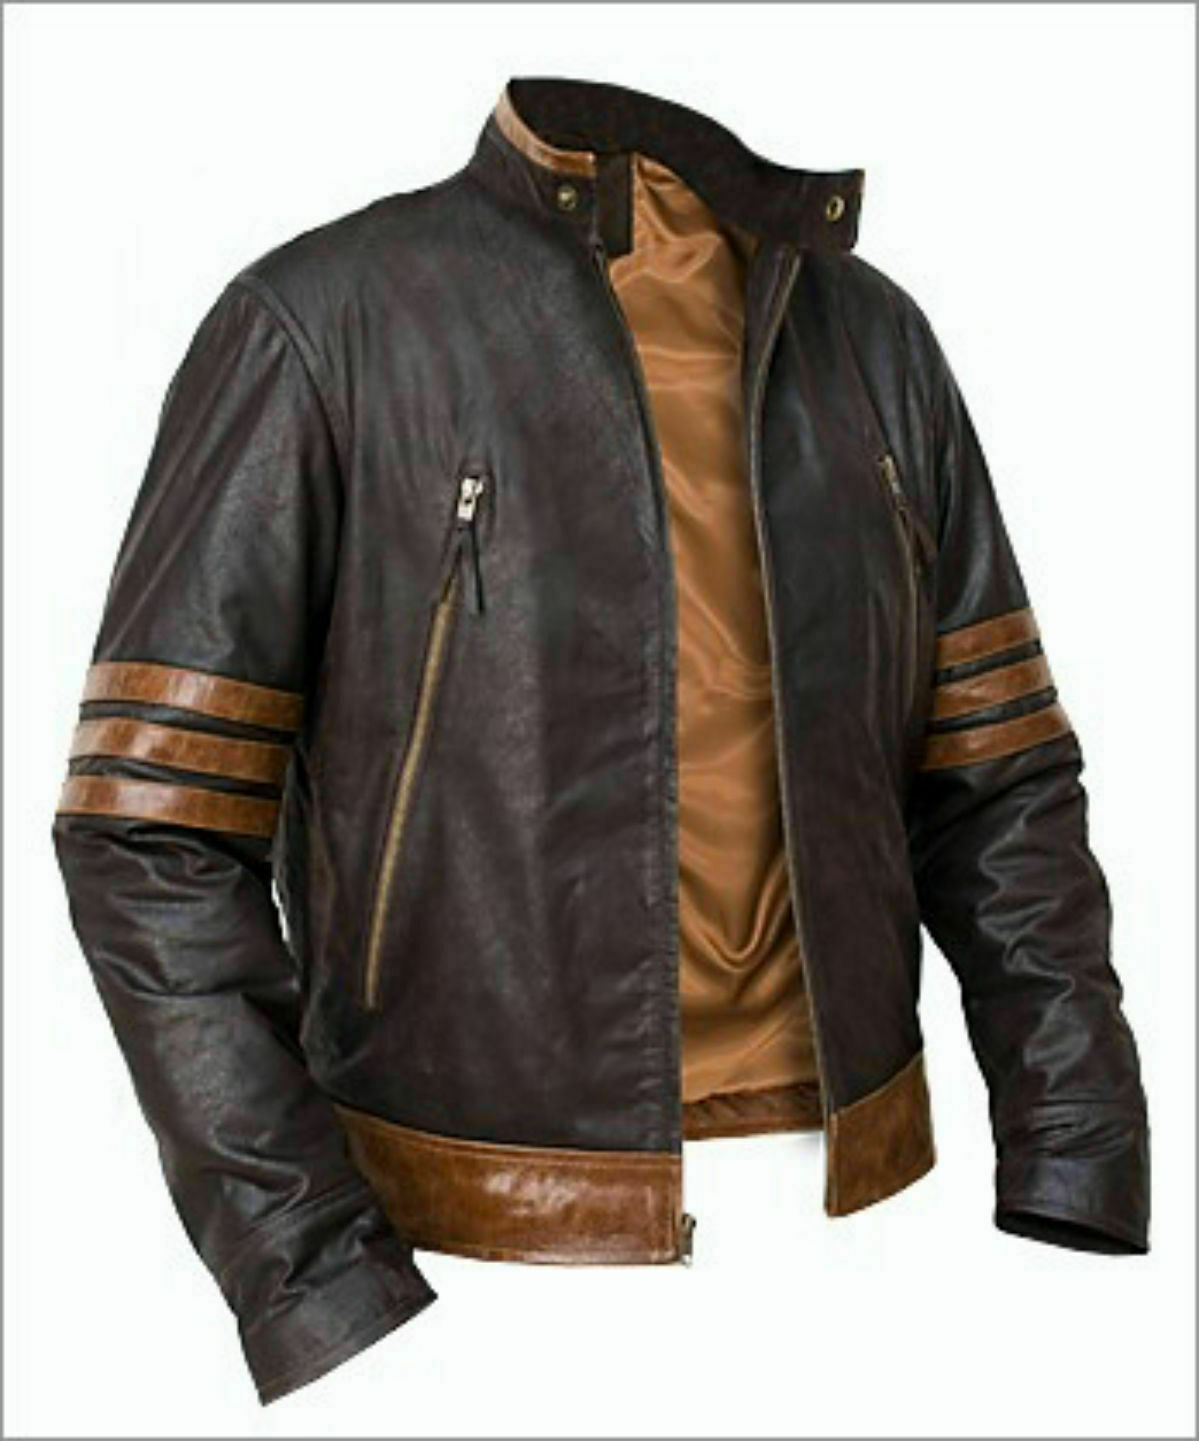 X-Men Wolverine Origins Bomber Style Brown Real Leather Jacket Size S M L XL 2XL